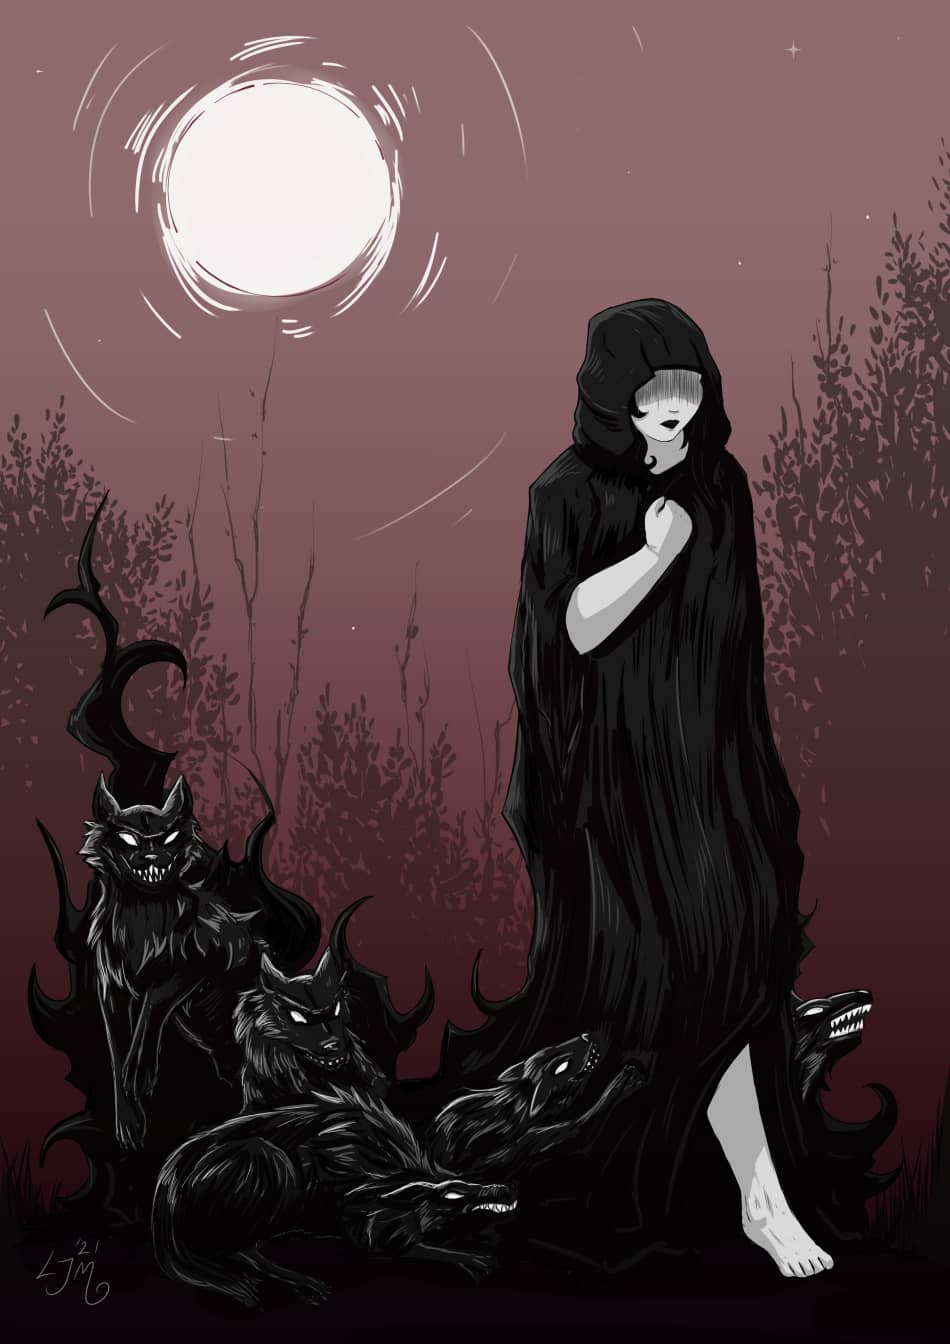 Illustration of a hooded woman walking with a pack of hounds under a blood red, moonlit sky